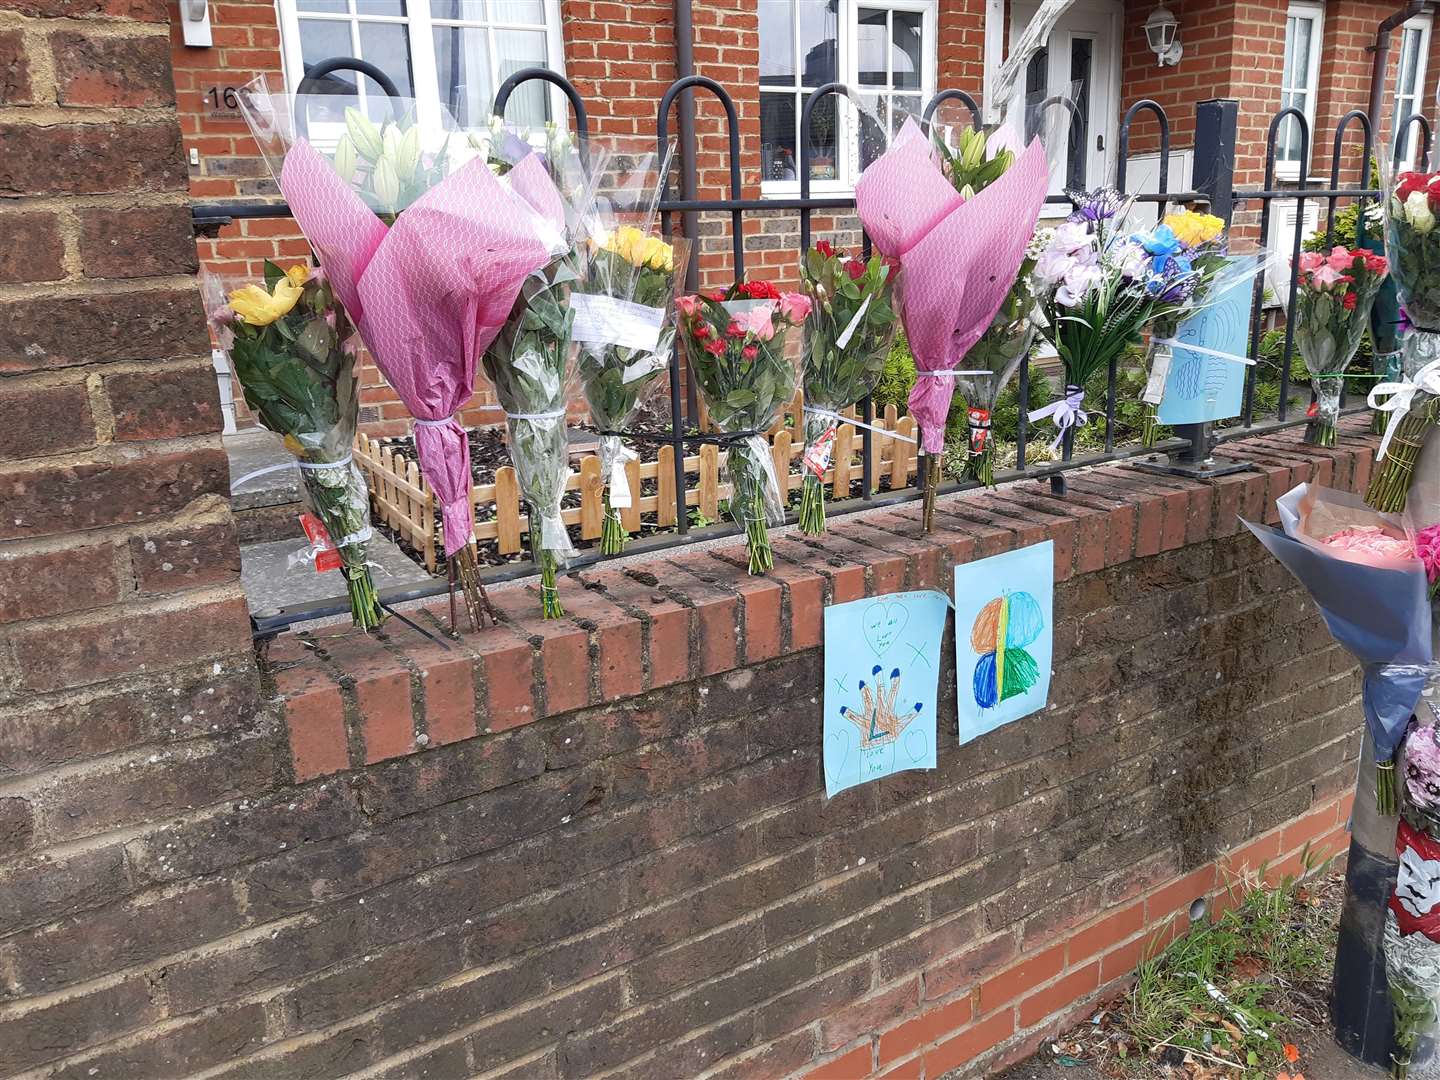 Local people gathered in Watling Street, Dartford, following a crash which killed a 10-year-old girl